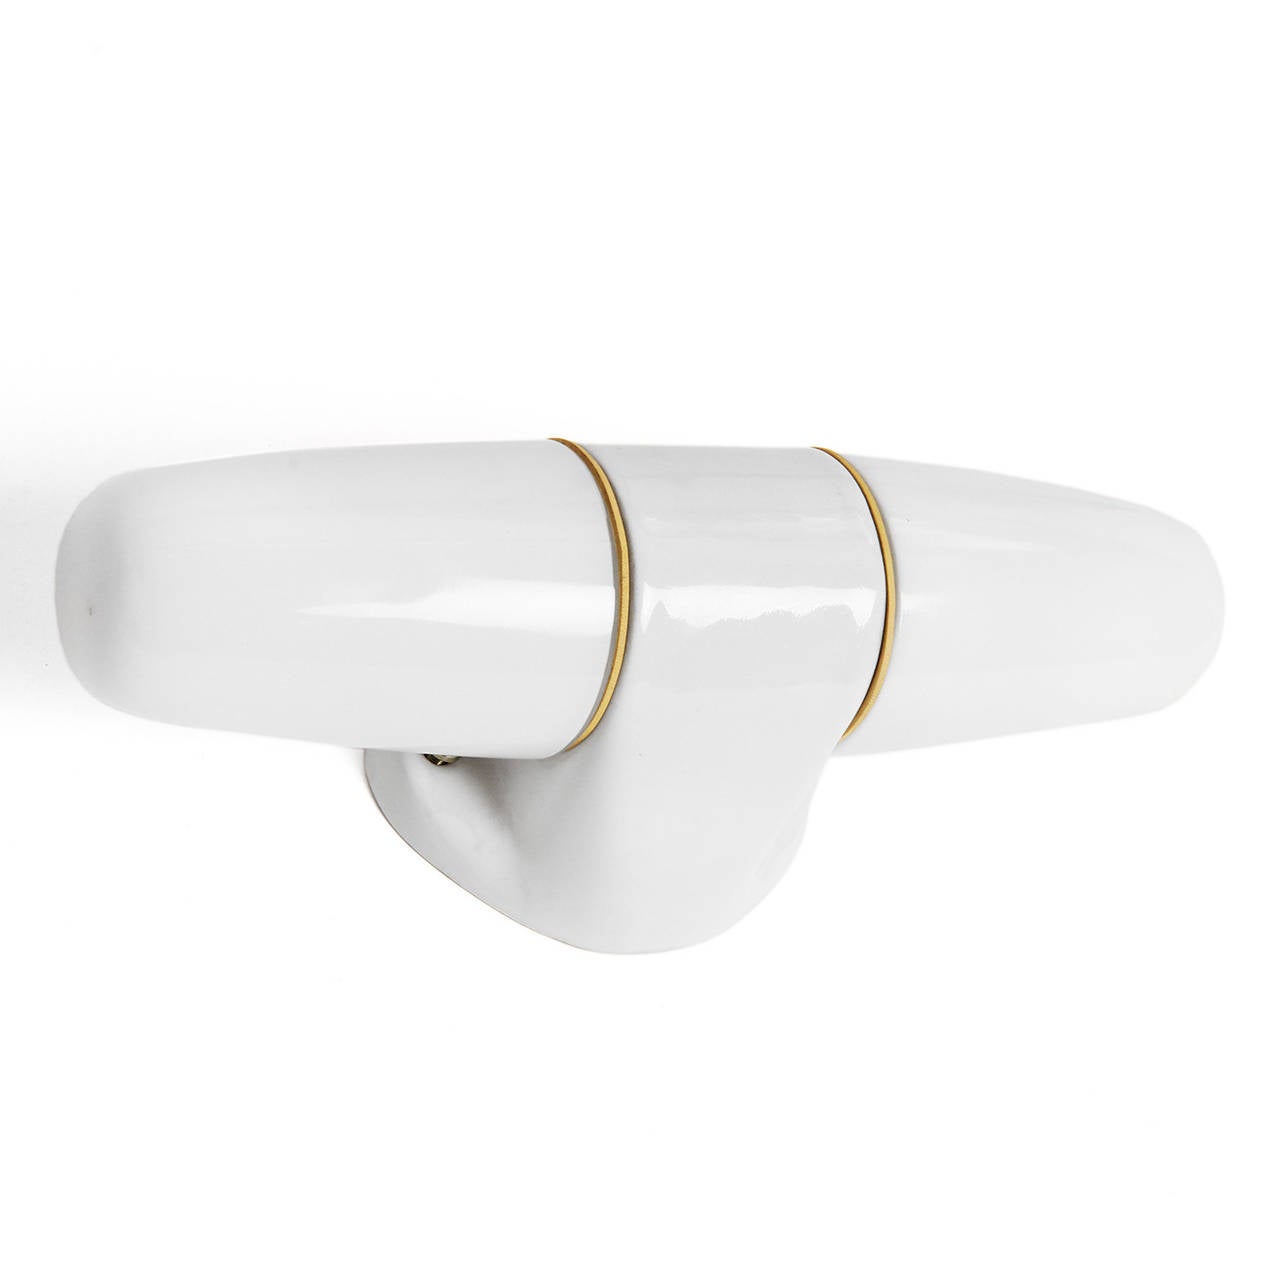 A sleek and finely fabricated wall sconce having a sculptural porcelain body and  projecting, slightly tapered milk glass shades.